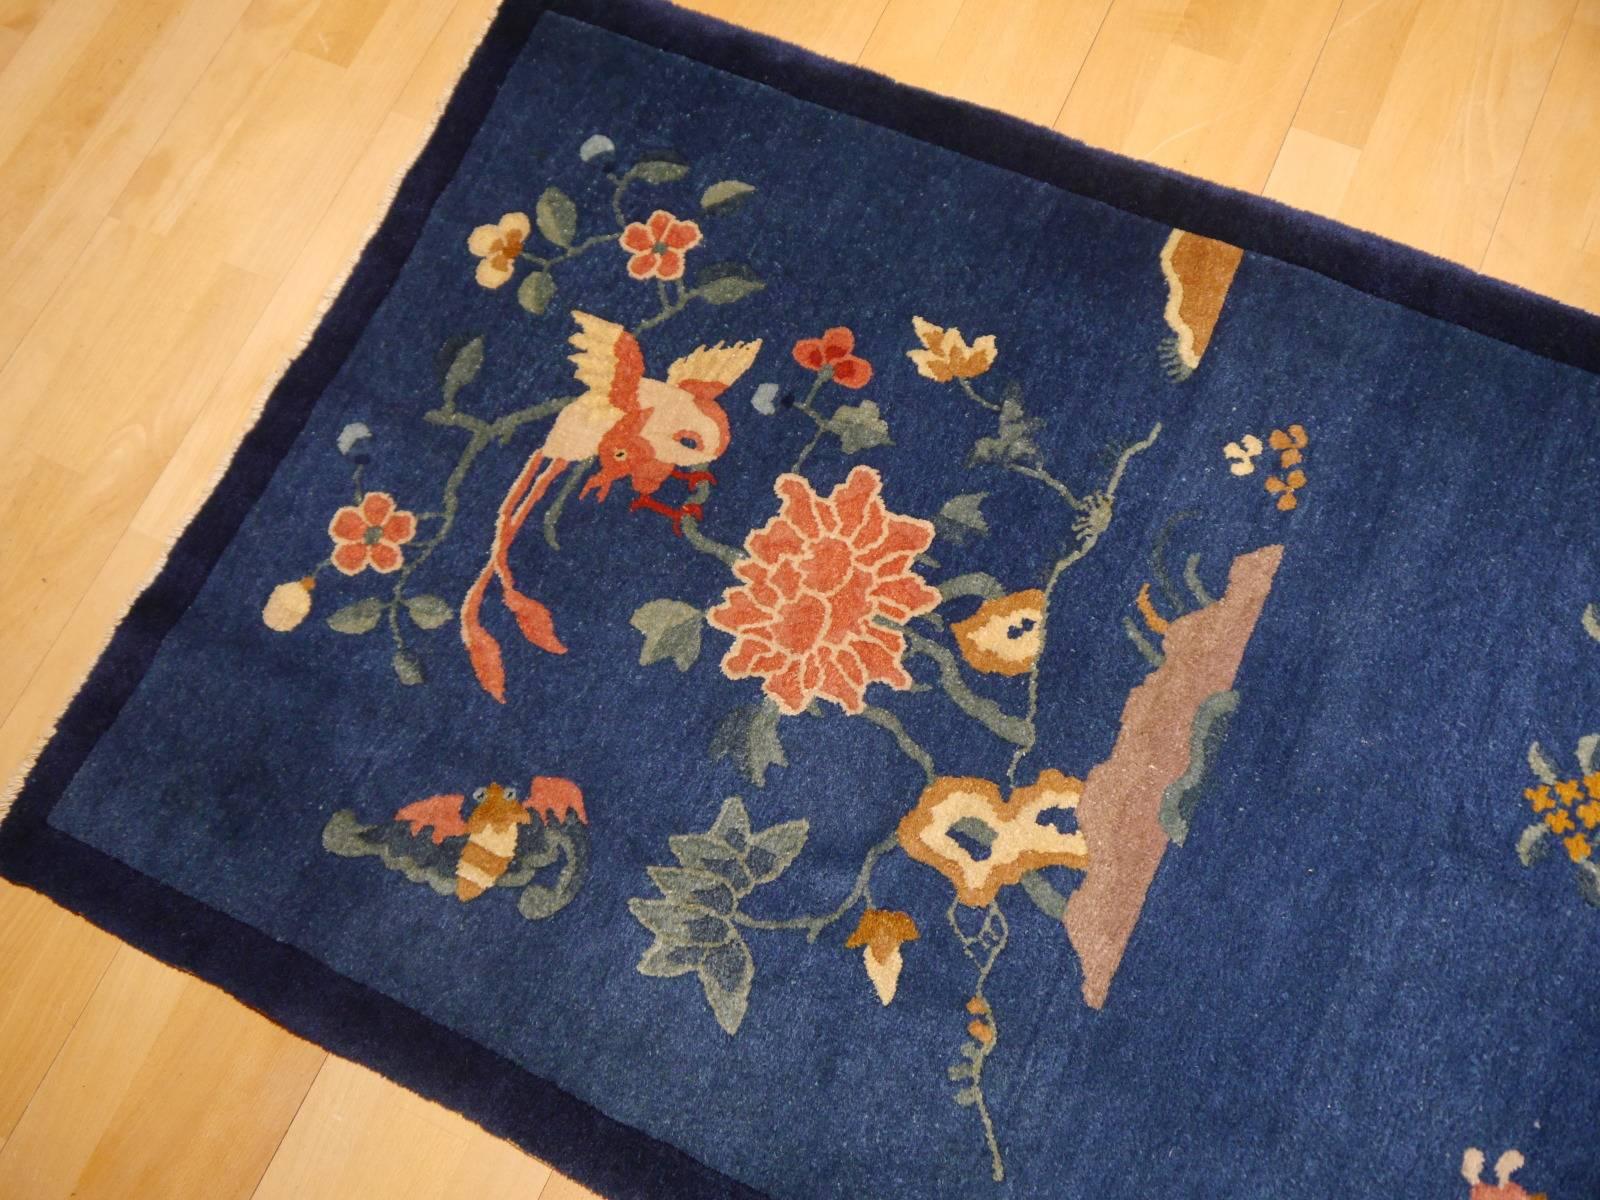 Very beautiful antique Peking Chinese Rug, clear blue Color combination and elegant reduced design. Great condition with high pile and without damages, collectors item.